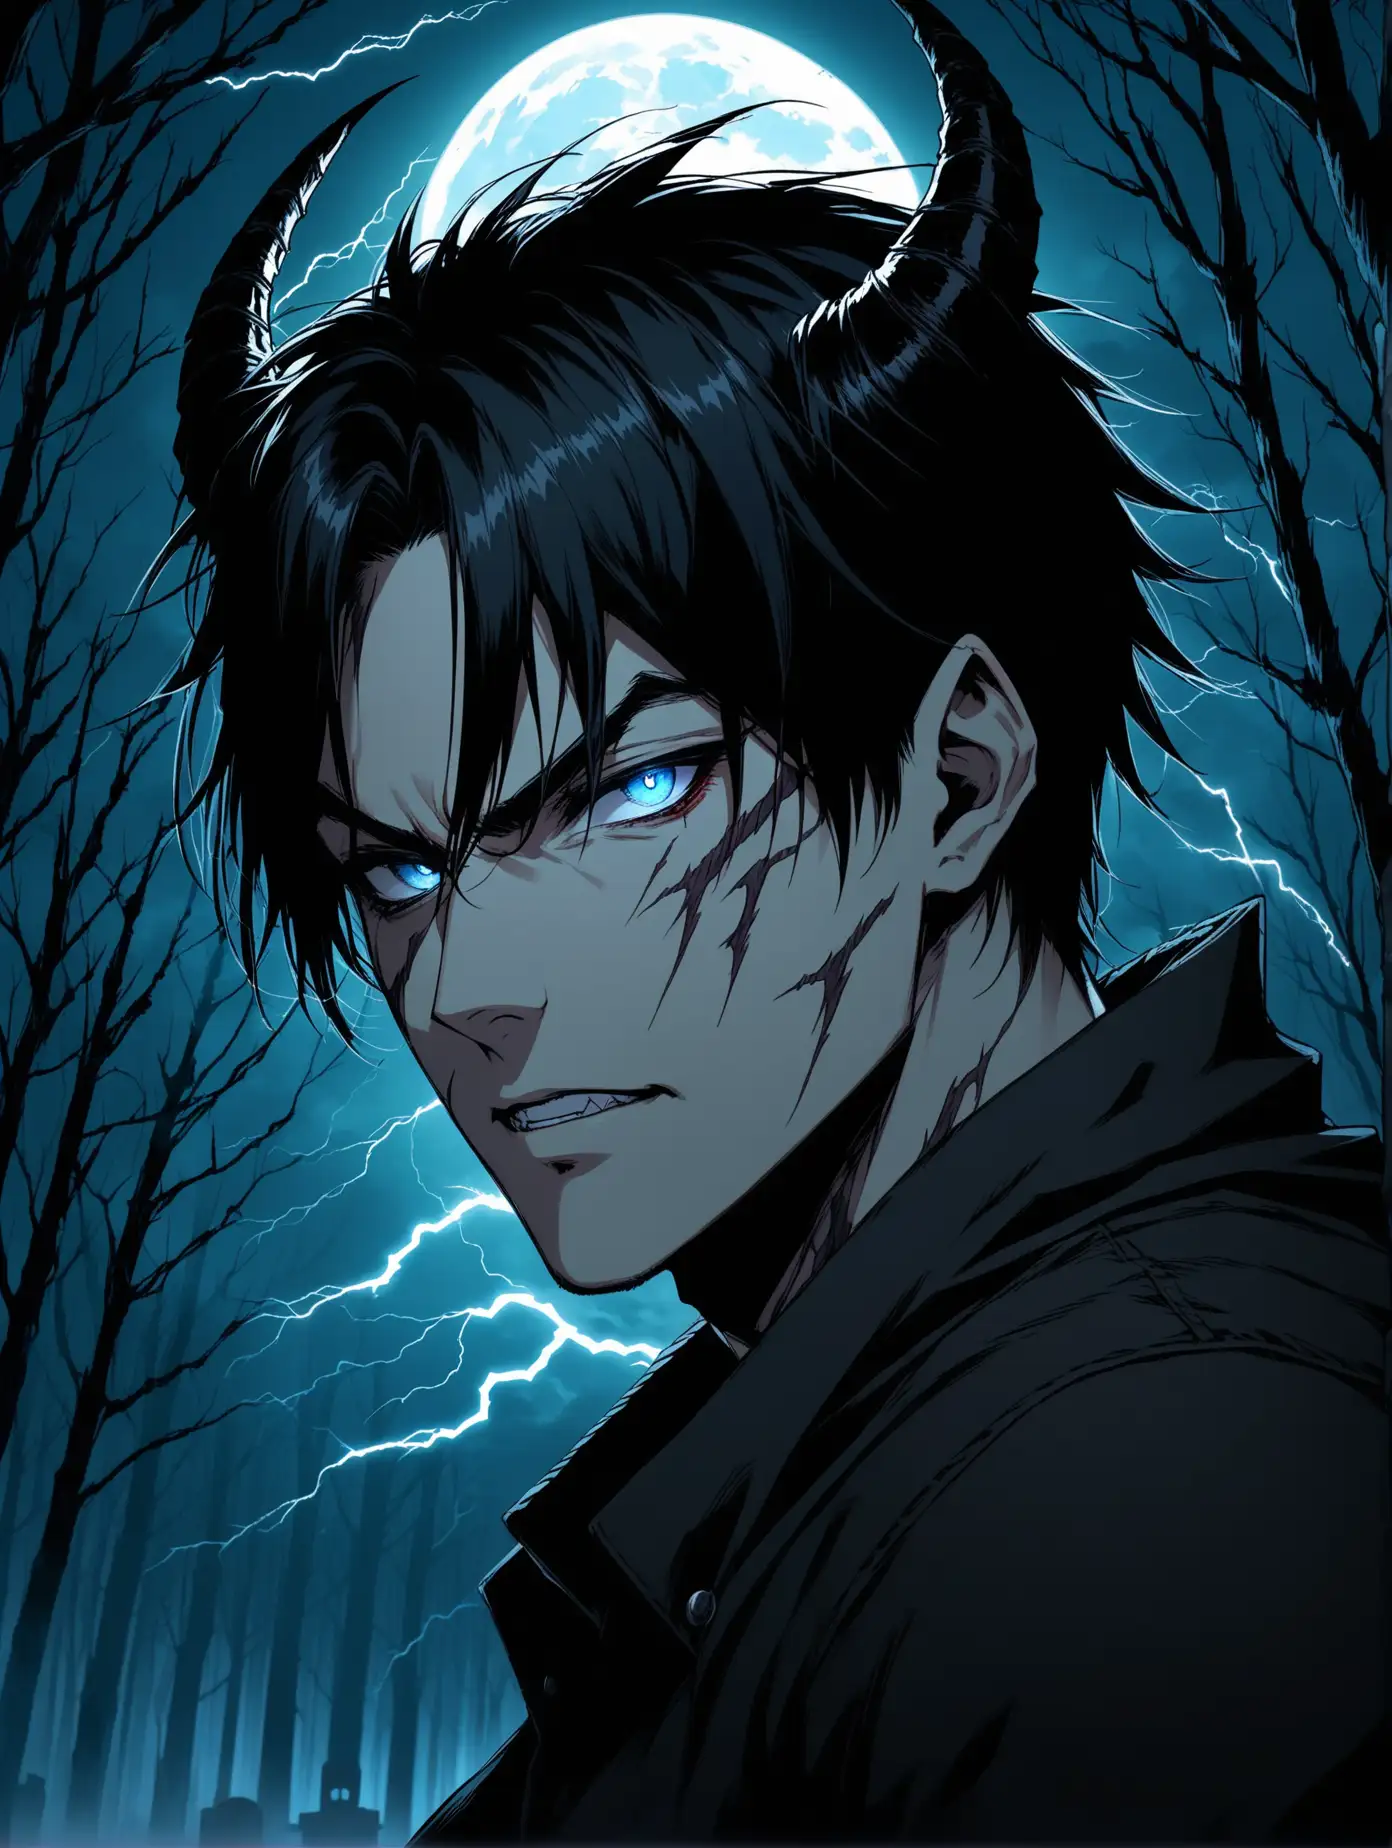 Sinister-Demon-Man-with-Black-Hair-and-Blue-Eyes-in-Moonlit-Graveyard